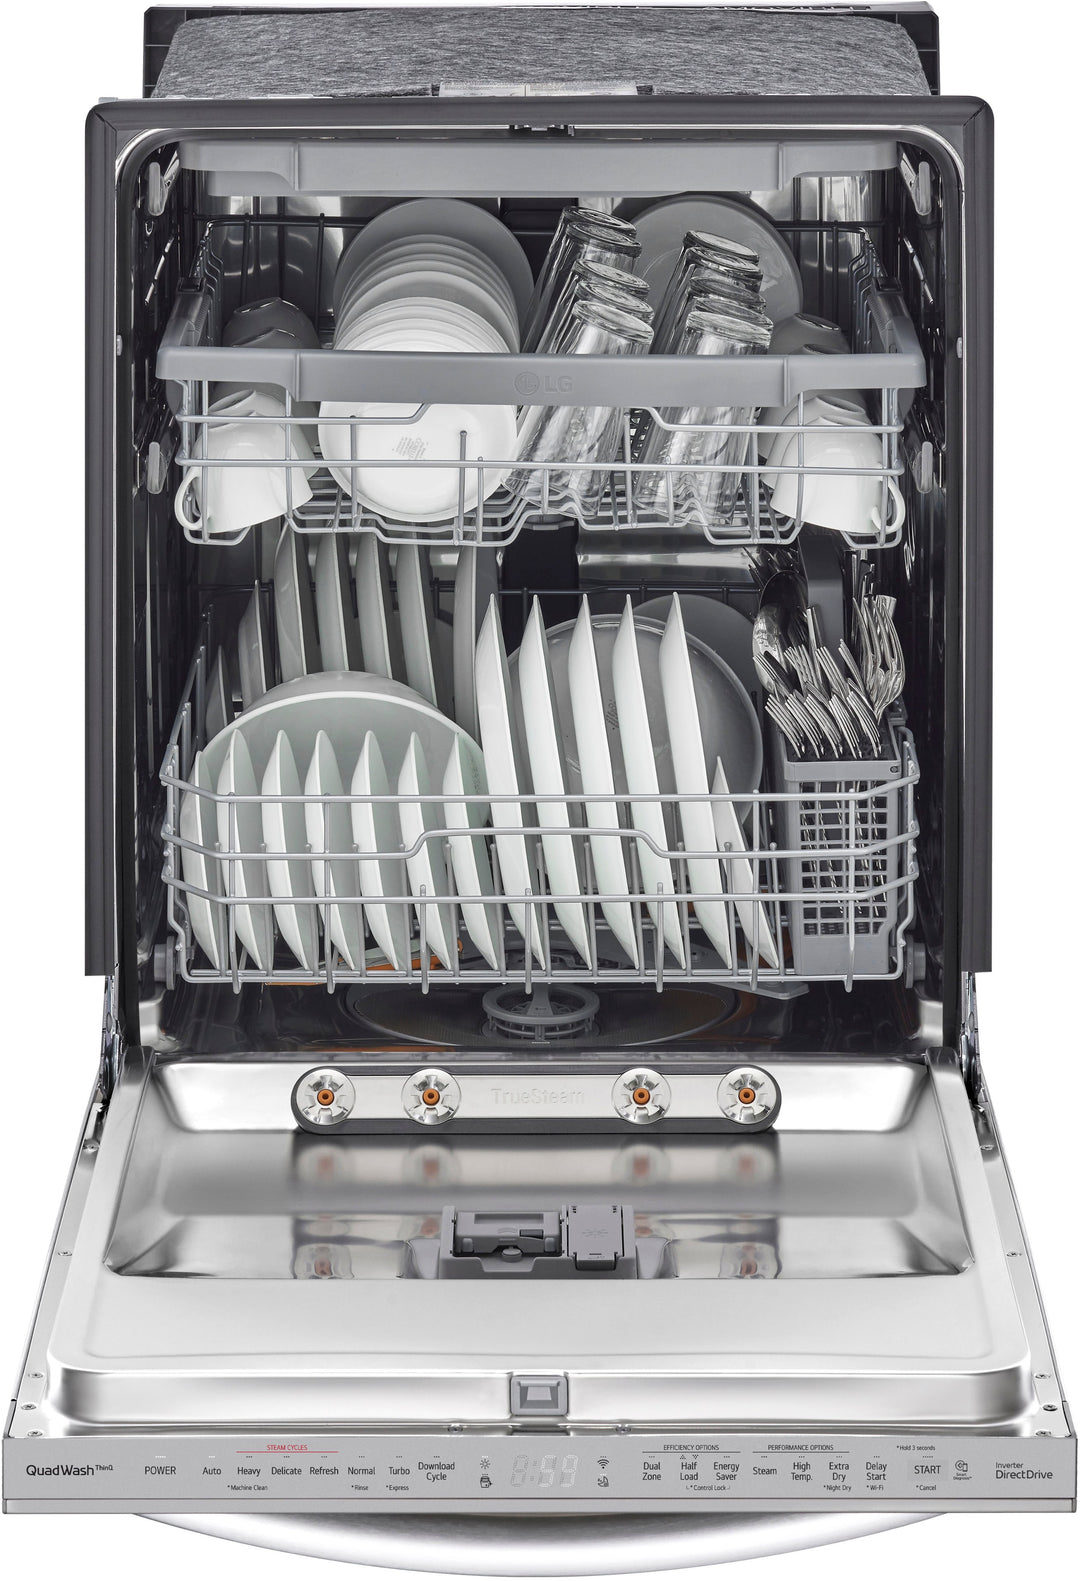 LG - 24" Top Control Smart Built-In Stainless Steel Tub Dishwasher with 3rd Rack, QuadWash and 46dba - Stainless steel_11